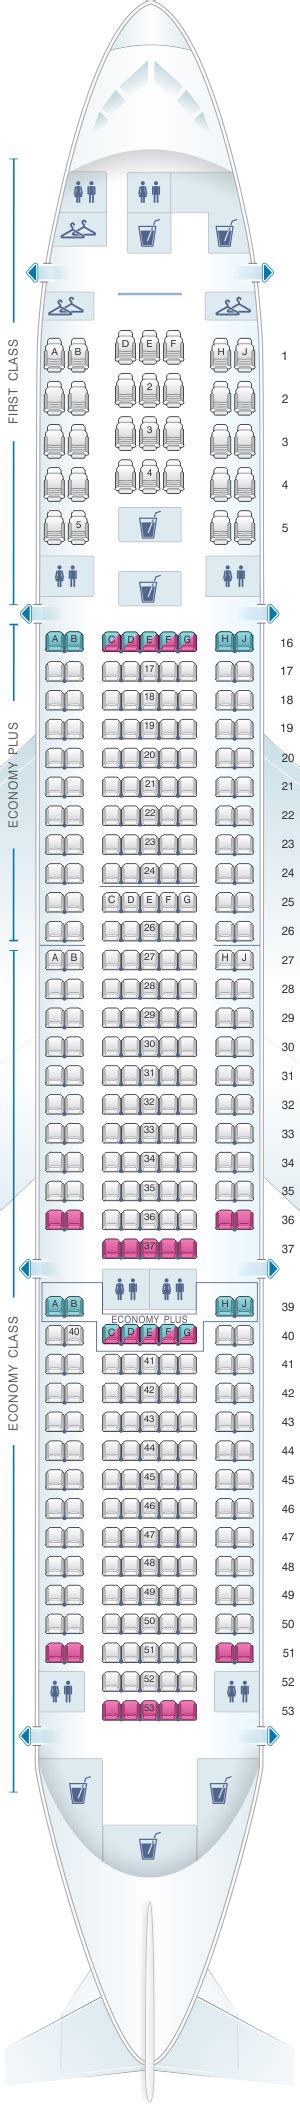 The American Airlines Boeing 777-200ER seats in the Main Cabin are numbered from A to H, with the A and F seats being close to the windows and the B and E seats being close to the aisle. The aisle is seen from the C and D seats, which are in the middle of the cabin. According to the seat map, the aisle seats in rows 21 and 23 are a good choice .... 